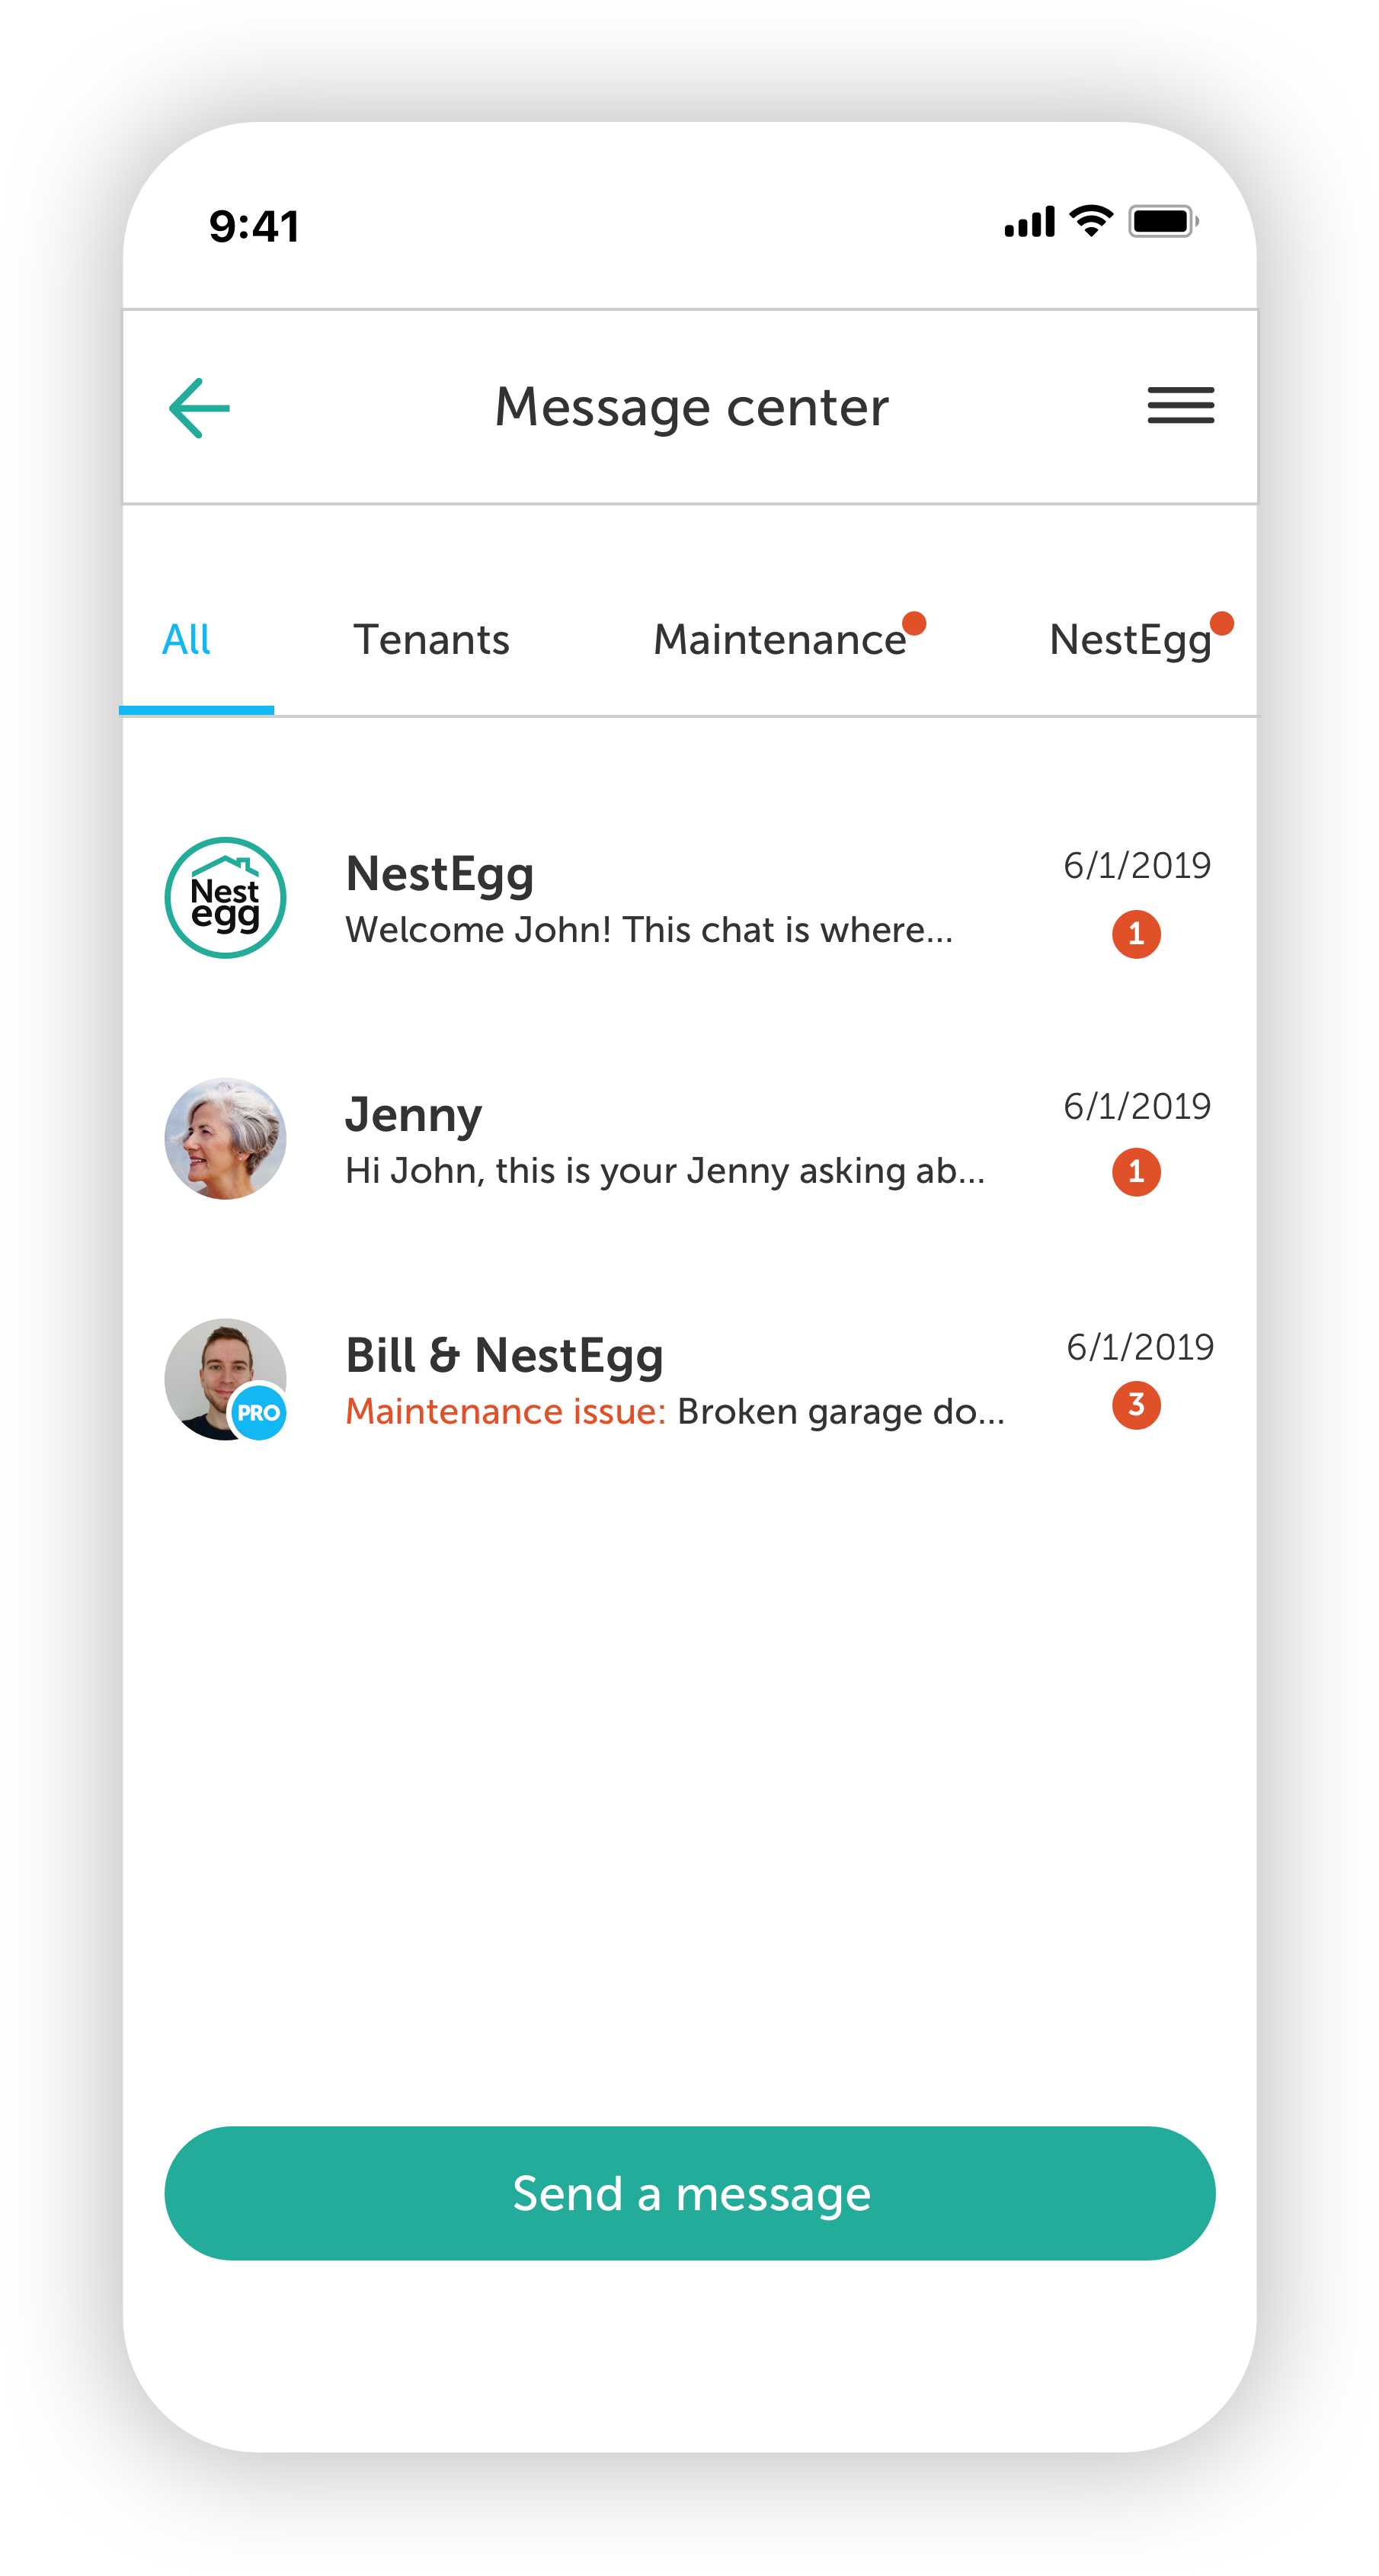 Chat with your tenants or NestEgg’s local experts in the Message Center section